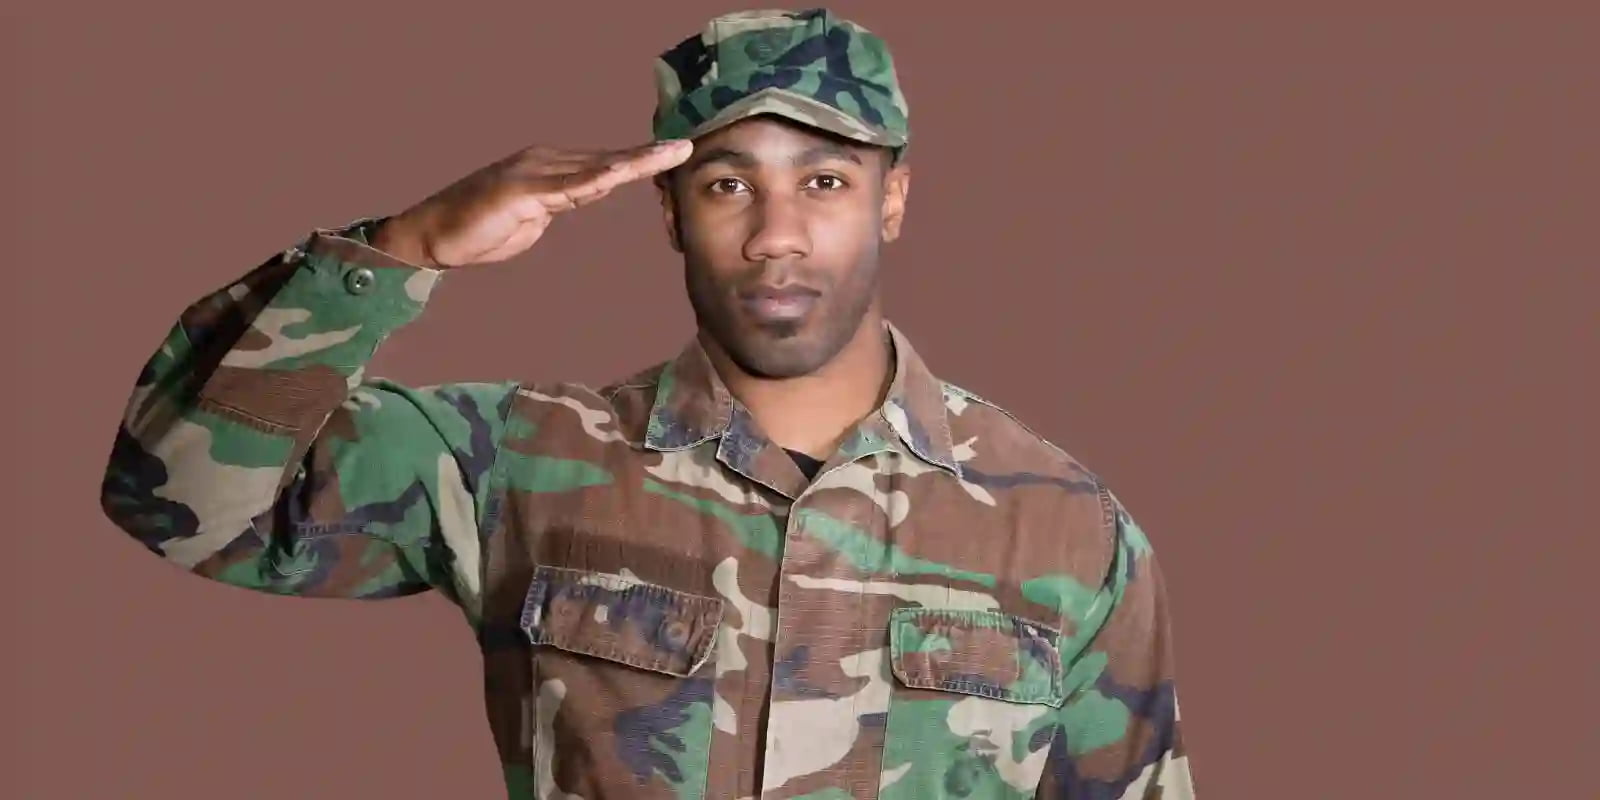 Stolen Valor: What It Is, Legality, and What to Do About It